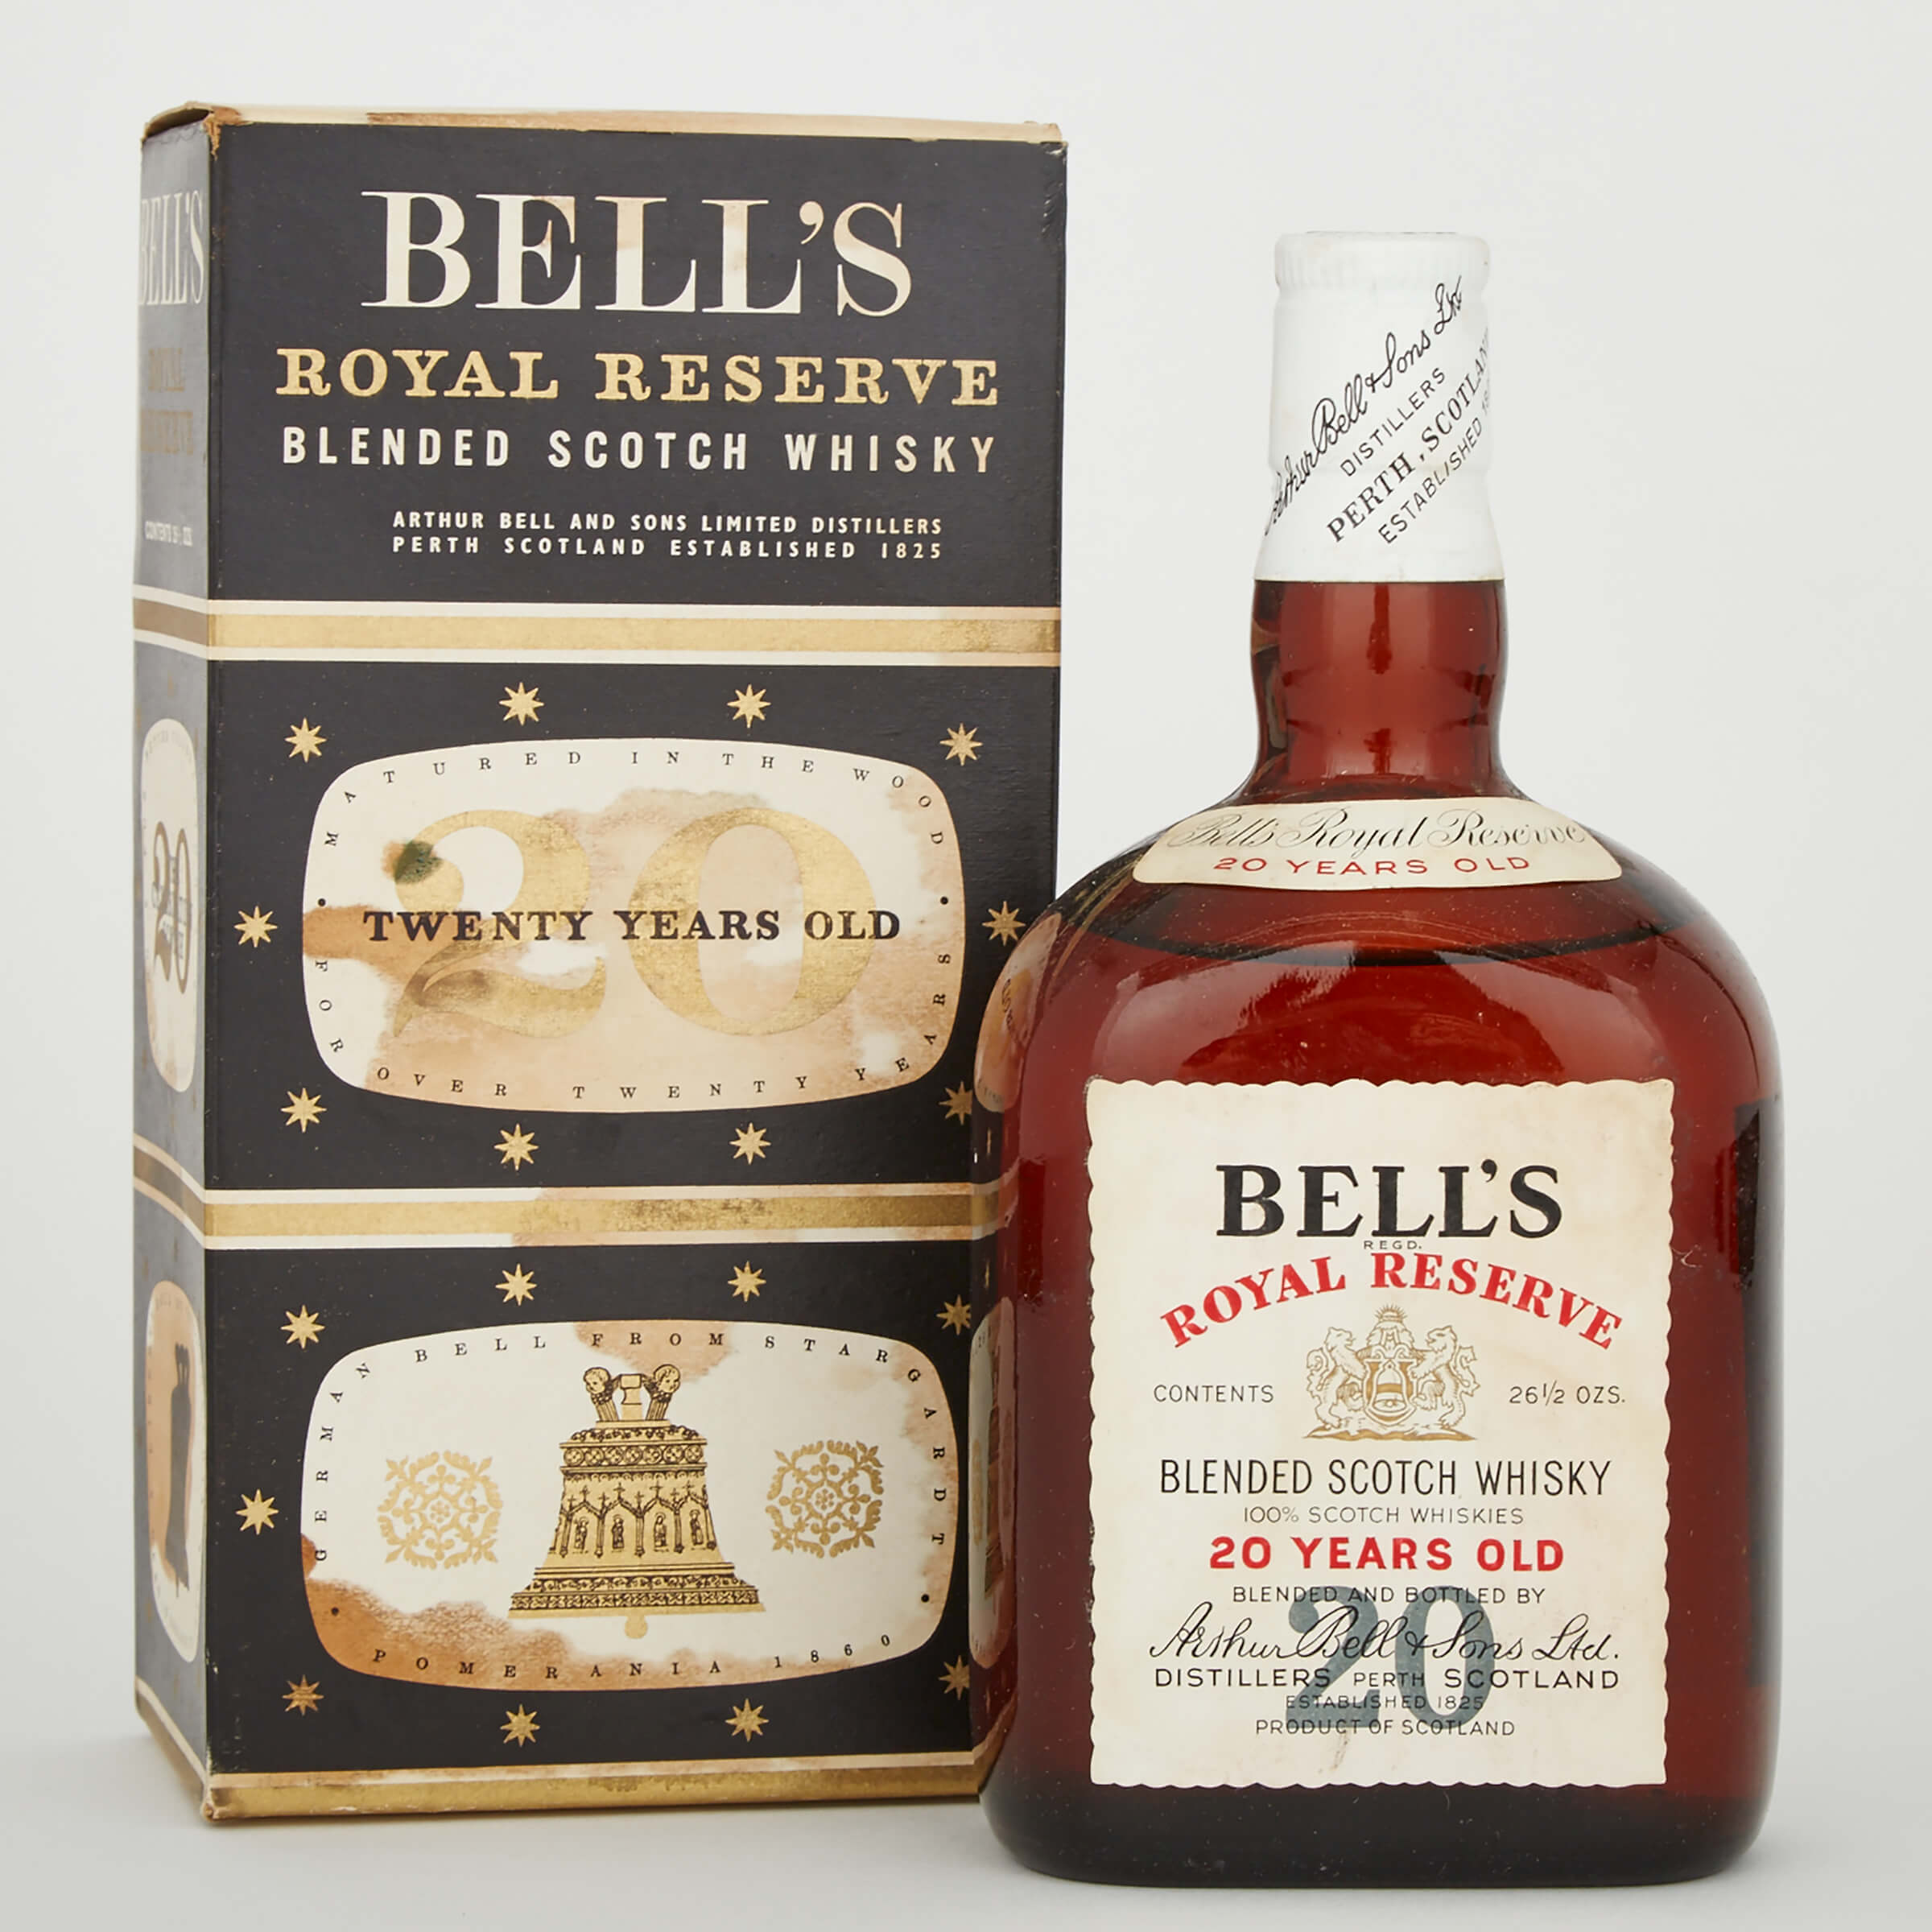 BELL’S ROYAL RESERVE BLENDED SCOTCH WHISKY 20 YEARS (ONE 26 1/2 OZ)